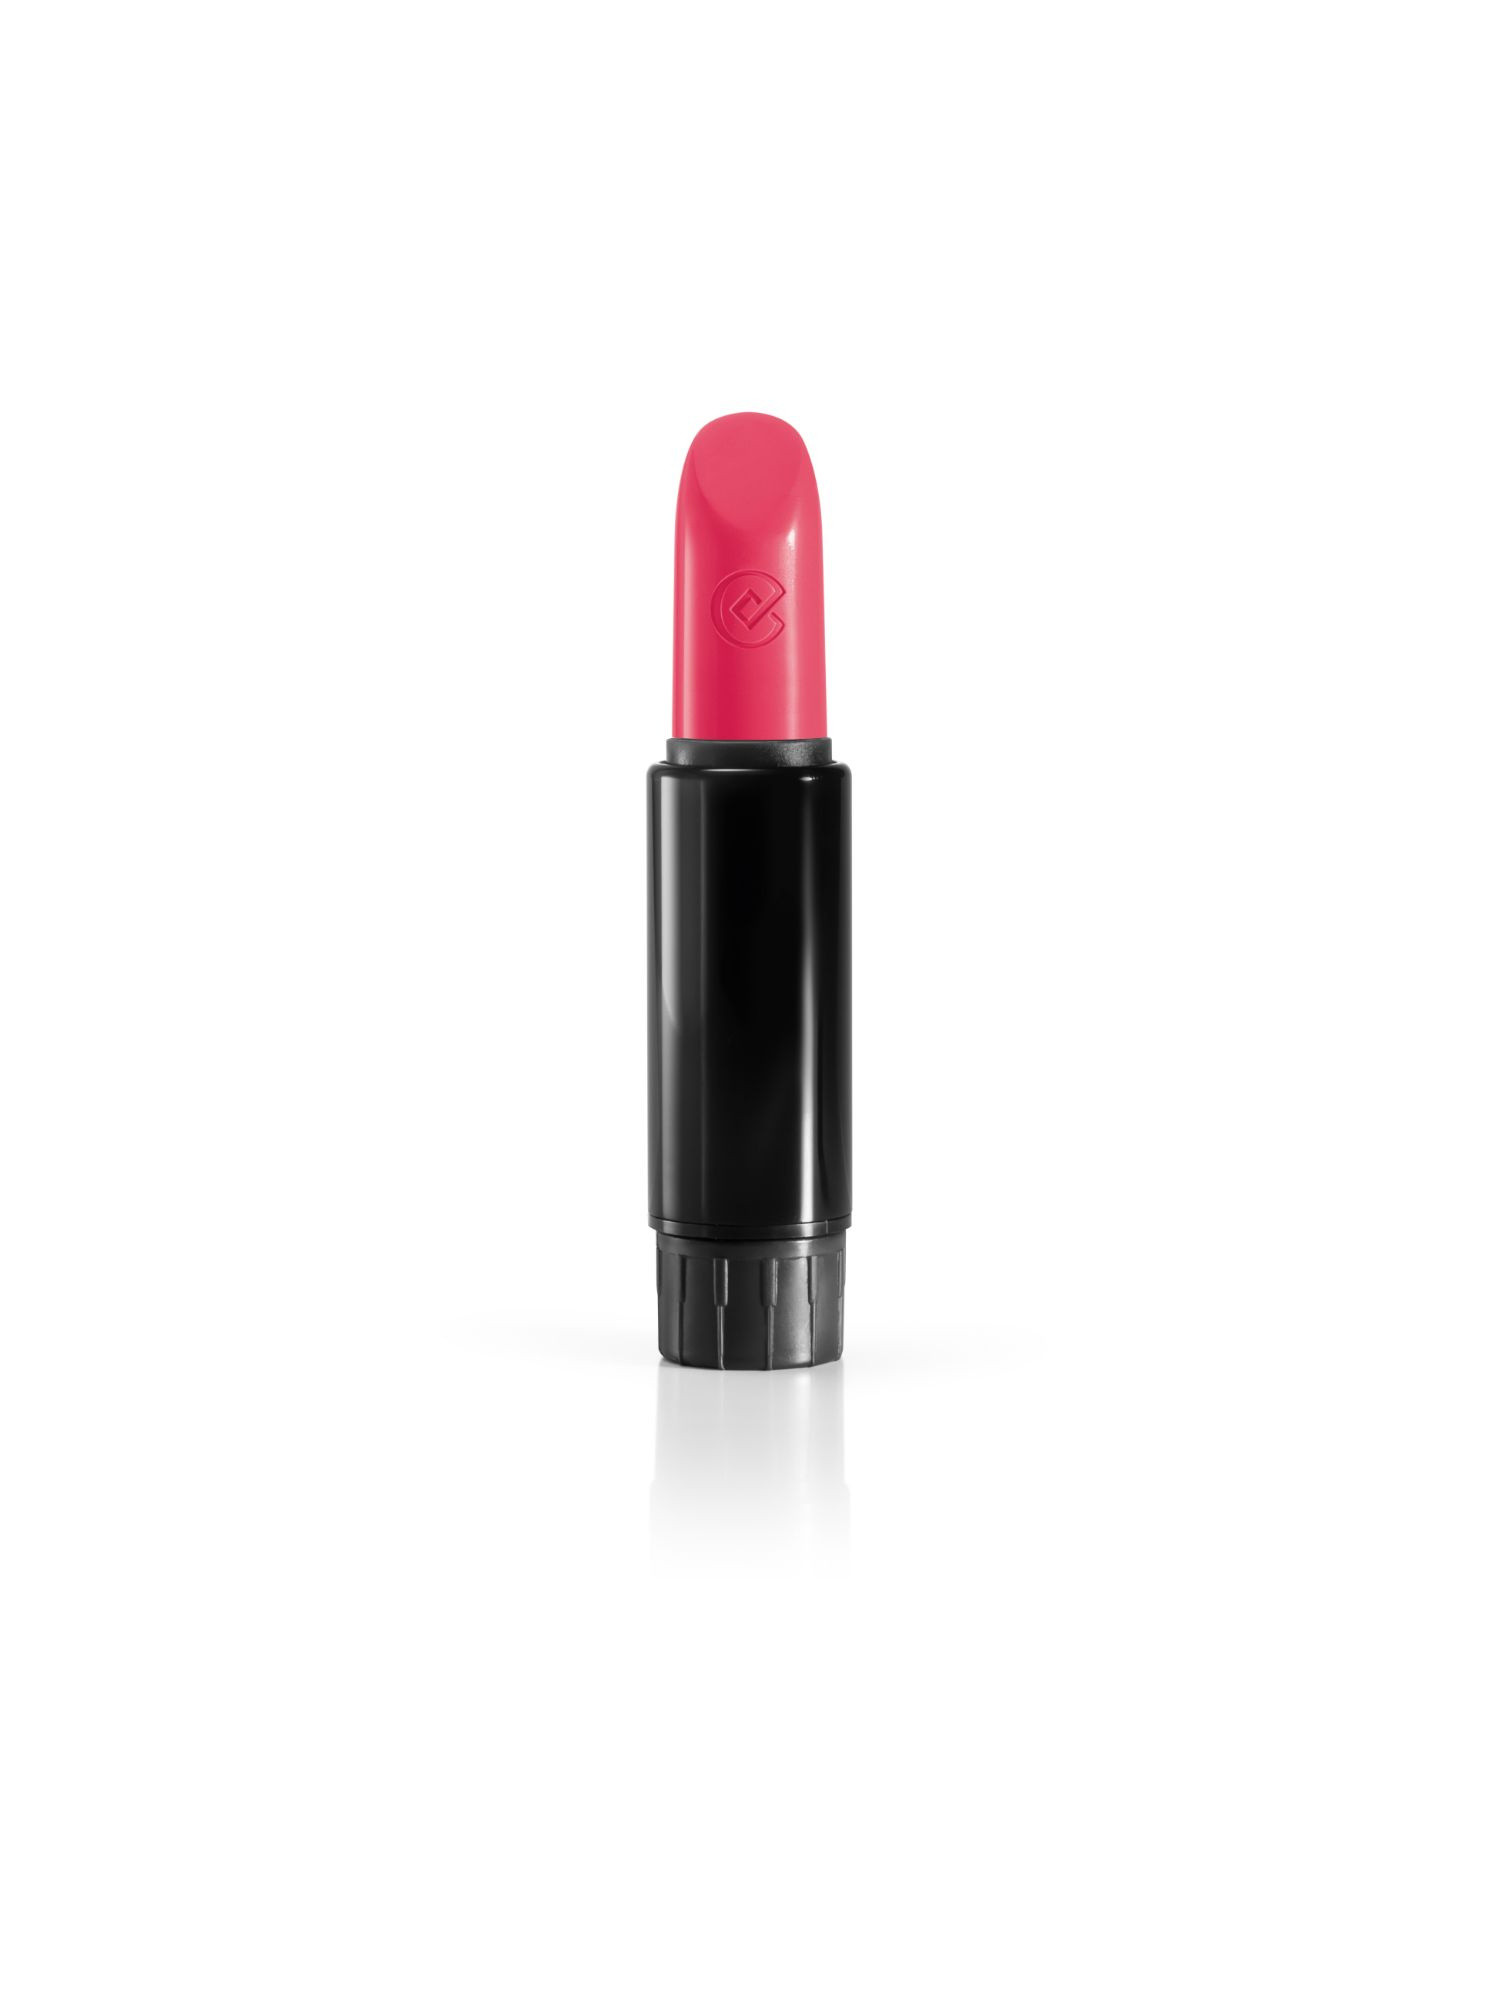 Pure lipstick refill - 107 Peony tattoo, Pink, large image number 0